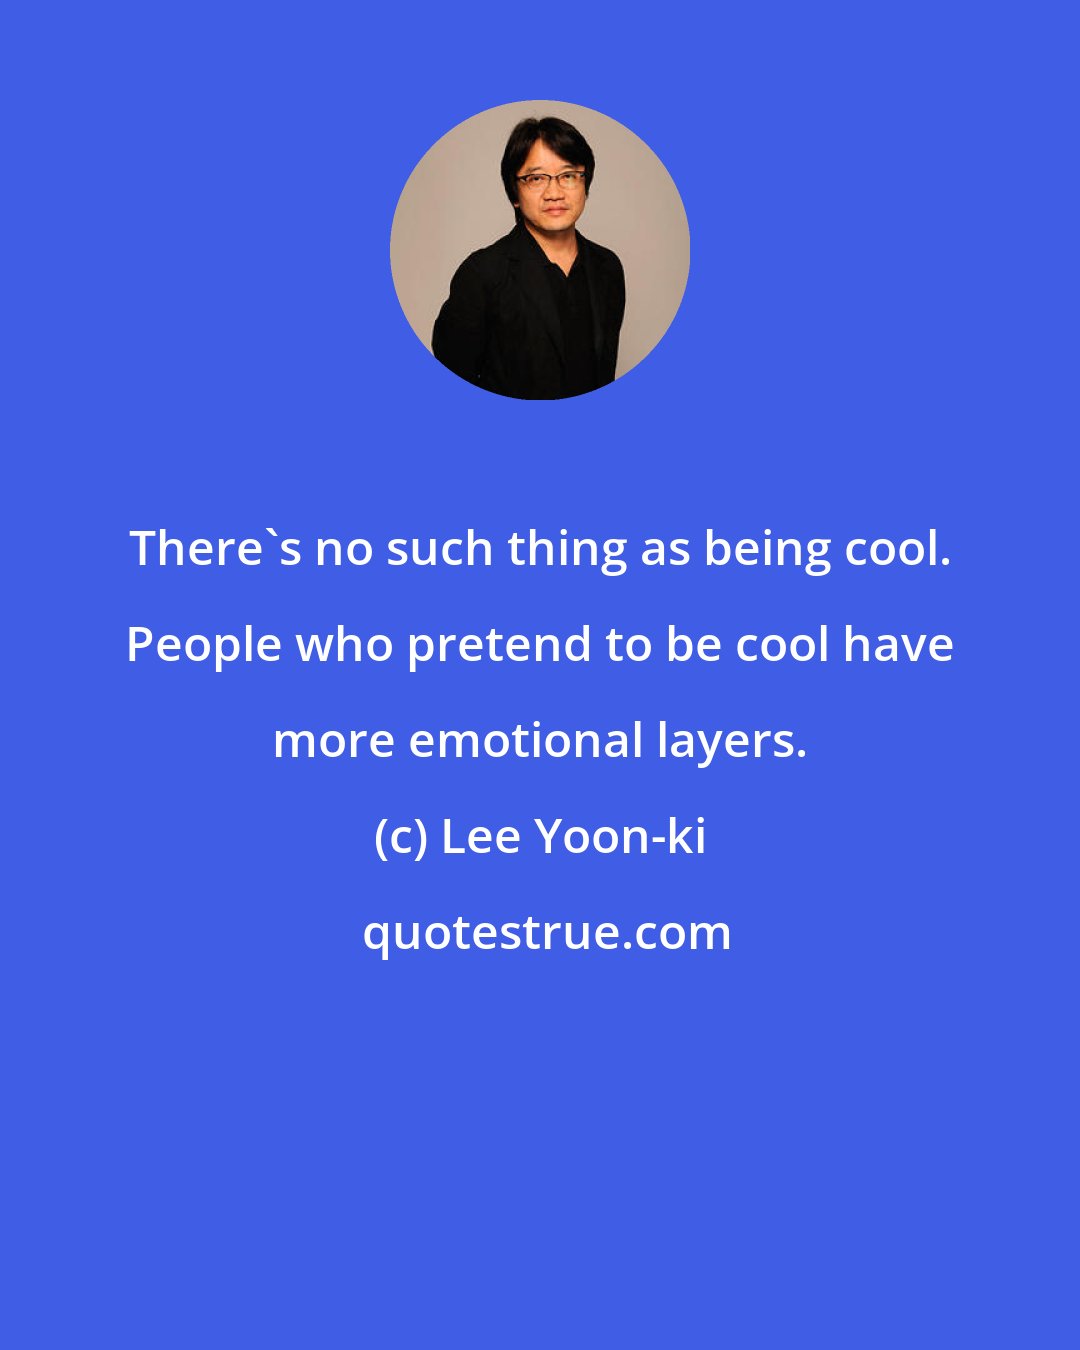 Lee Yoon-ki: There's no such thing as being cool. People who pretend to be cool have more emotional layers.